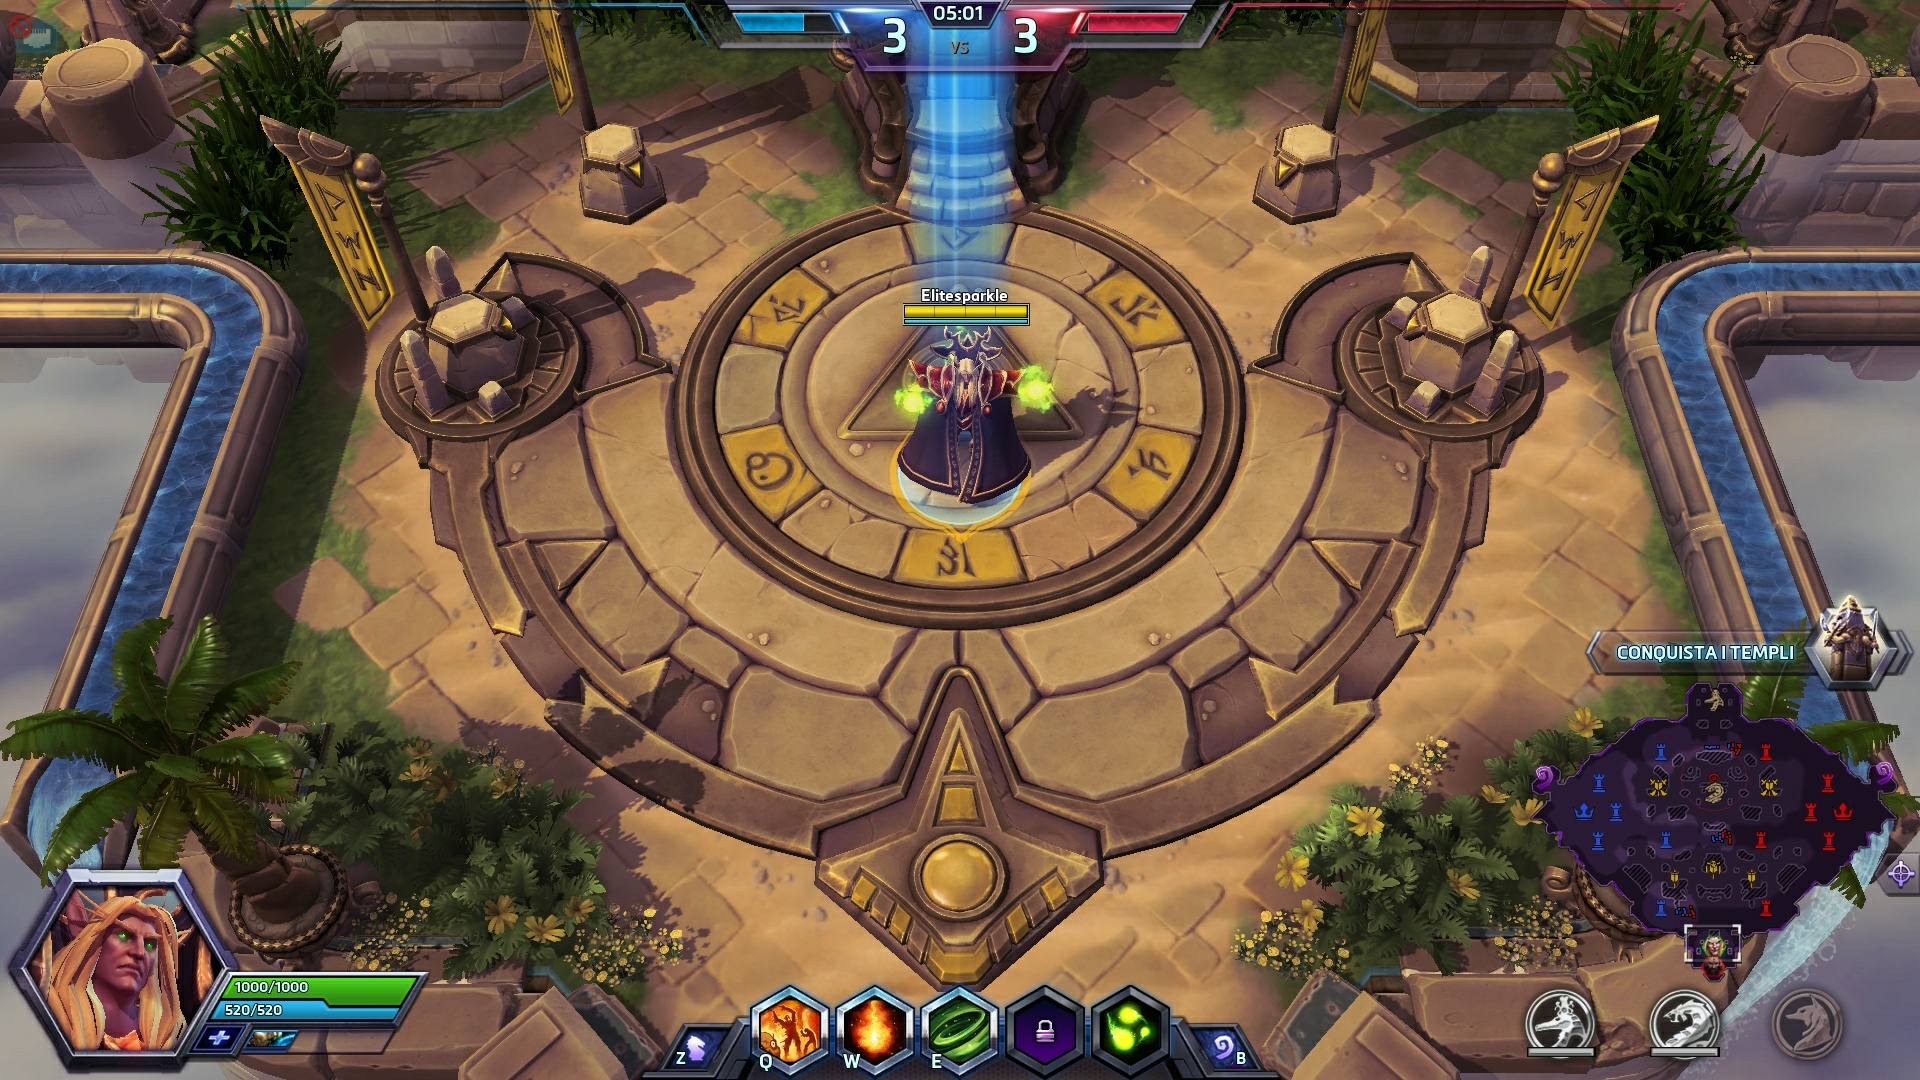 Test A - Part 1. Player Top and Opponent Bottom (No Mount) - Centered on Player.jpg